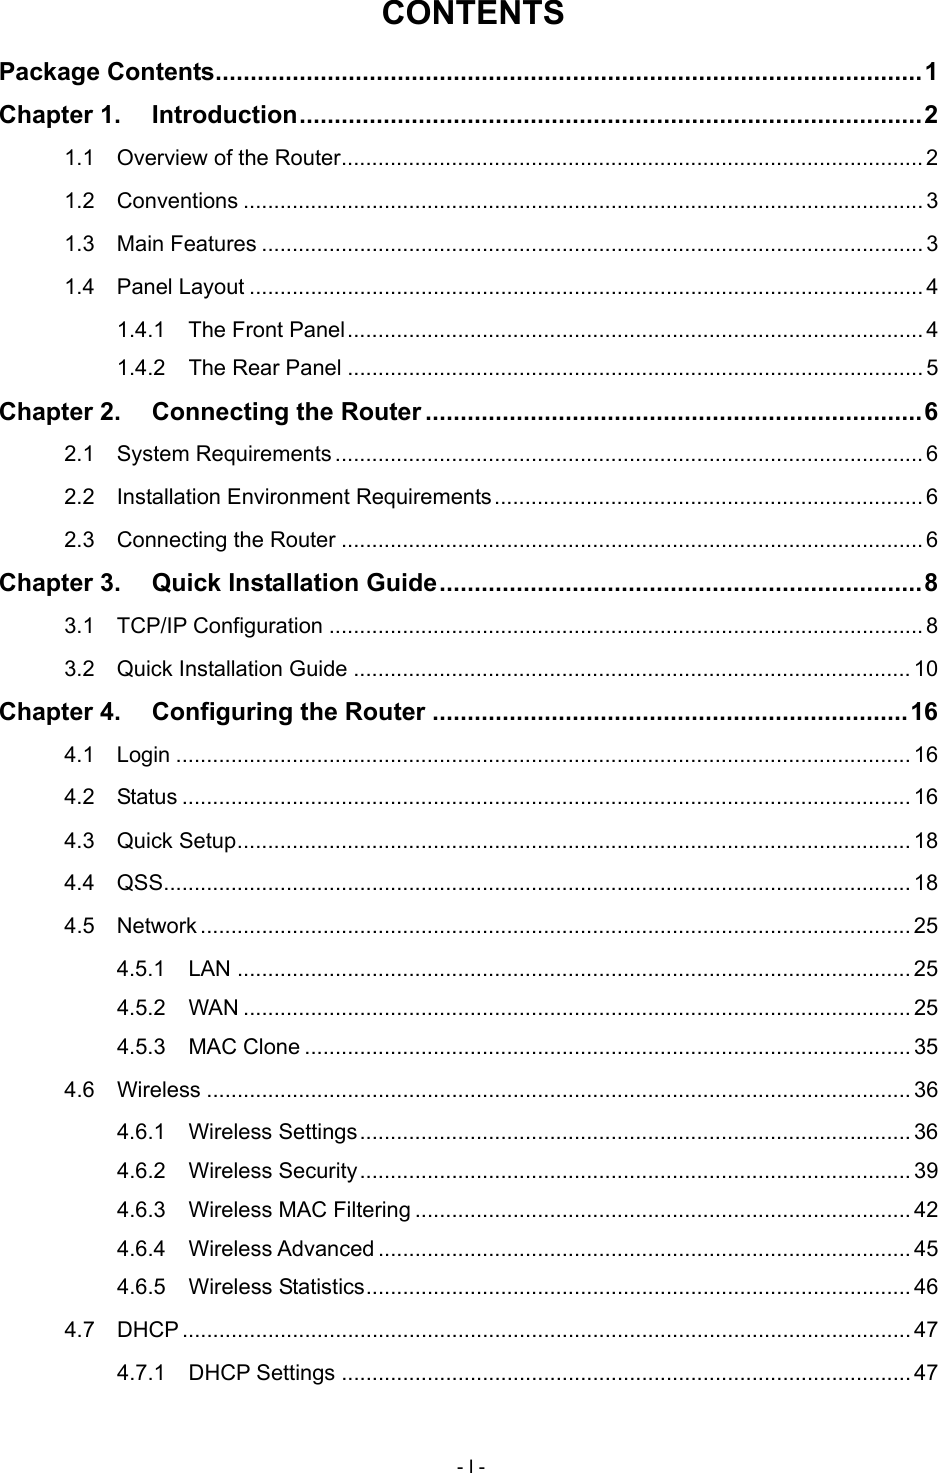  CONTENTS Package Contents.....................................................................................................1 Chapter 1. Introduction.........................................................................................2 1.1 Overview of the Router...............................................................................................2 1.2 Conventions ...............................................................................................................3 1.3 Main Features ............................................................................................................ 3 1.4 Panel Layout .............................................................................................................. 4 1.4.1 The Front Panel..............................................................................................4 1.4.2 The Rear Panel ..............................................................................................5 Chapter 2. Connecting the Router .......................................................................6 2.1 System Requirements ................................................................................................ 6 2.2 Installation Environment Requirements......................................................................6 2.3 Connecting the Router ............................................................................................... 6 Chapter 3. Quick Installation Guide.....................................................................8 3.1 TCP/IP Configuration .................................................................................................8 3.2 Quick Installation Guide ........................................................................................... 10 Chapter 4. Configuring the Router ....................................................................16 4.1 Login ........................................................................................................................ 16 4.2 Status ....................................................................................................................... 16 4.3 Quick Setup.............................................................................................................. 18 4.4 QSS.......................................................................................................................... 18 4.5 Network .................................................................................................................... 25 4.5.1 LAN .............................................................................................................. 25 4.5.2 WAN ............................................................................................................. 25 4.5.3 MAC Clone ................................................................................................... 35 4.6 Wireless ................................................................................................................... 36 4.6.1 Wireless Settings.......................................................................................... 36 4.6.2 Wireless Security.......................................................................................... 39 4.6.3 Wireless MAC Filtering ................................................................................. 42 4.6.4 Wireless Advanced ....................................................................................... 45 4.6.5 Wireless Statistics......................................................................................... 46 4.7 DHCP ....................................................................................................................... 47 4.7.1 DHCP Settings ............................................................................................. 47 - I - 